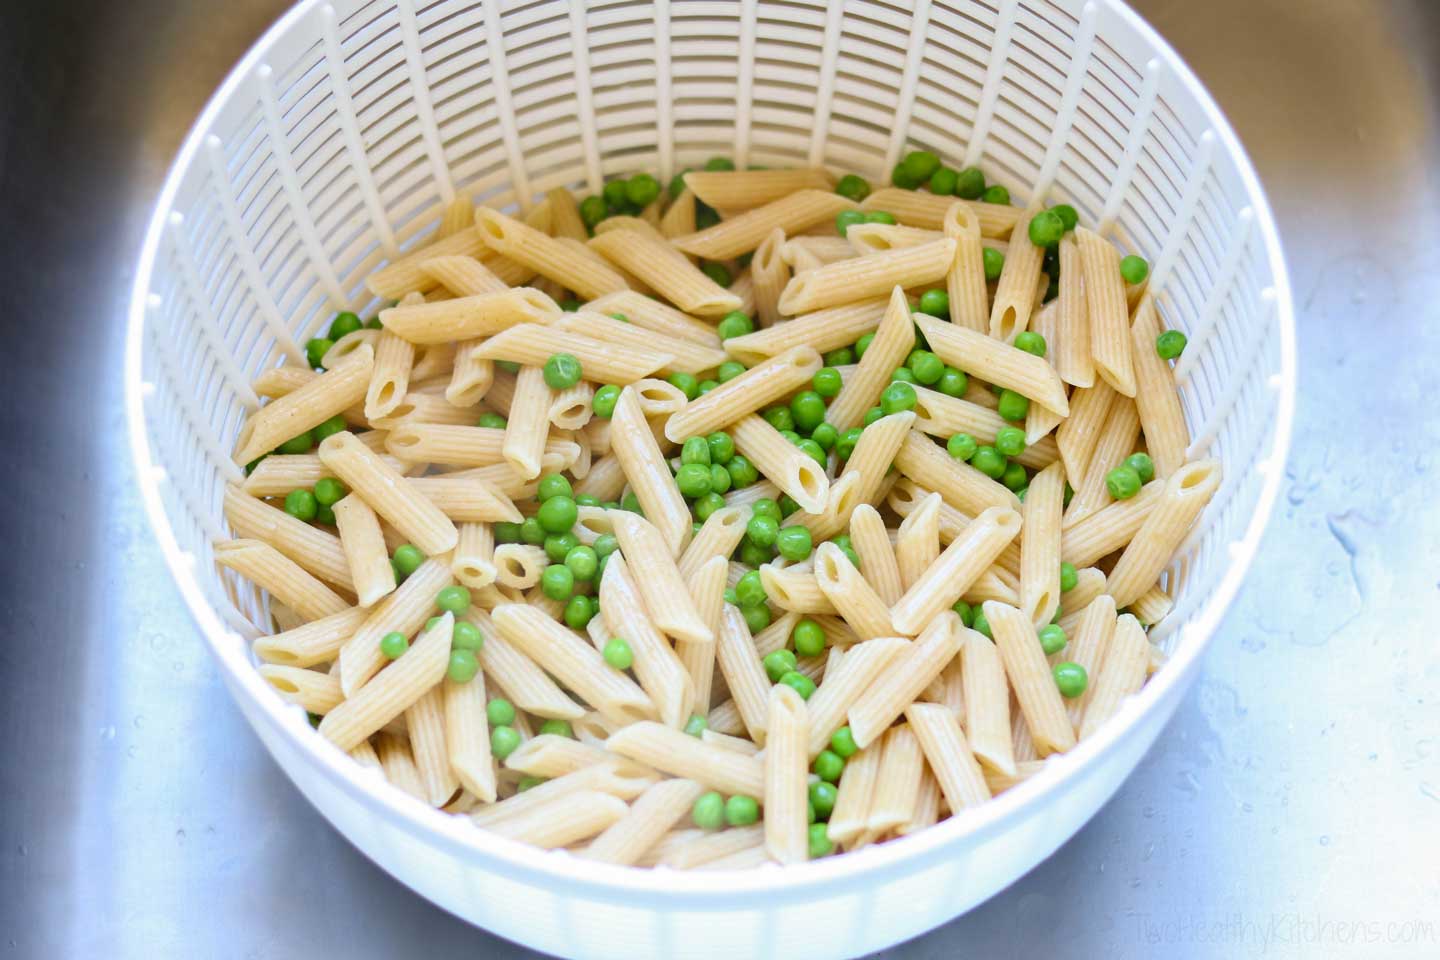 No need to cook your peas separately – the pasta and peas happen all at once, which is a terrific time saver!